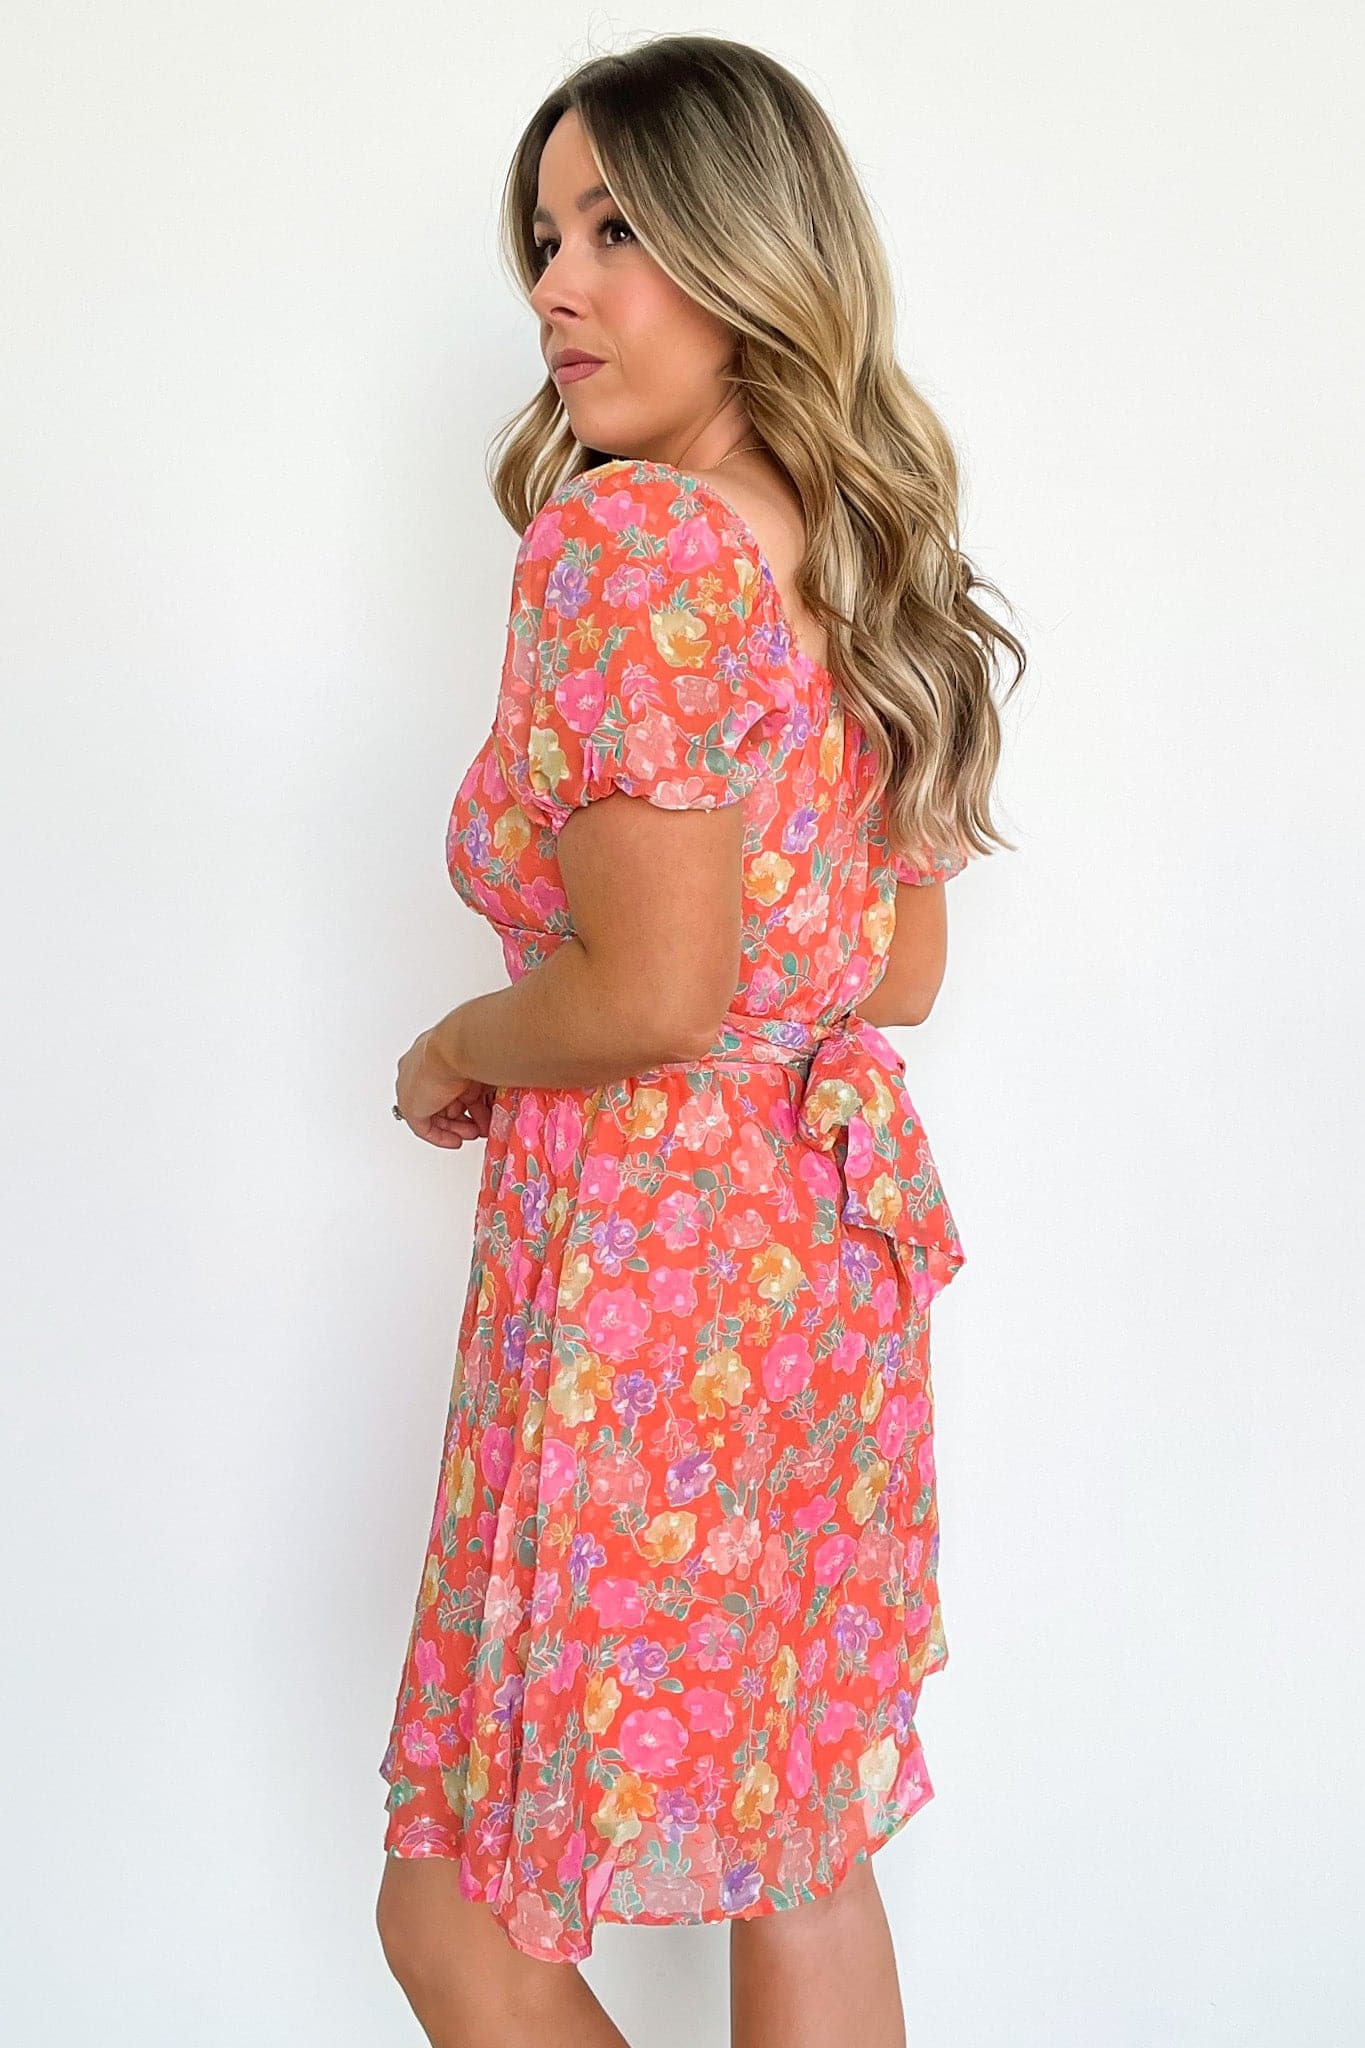  Pretty in Petals Floral Tie Back Flare Dress - FINAL SALE - Madison and Mallory